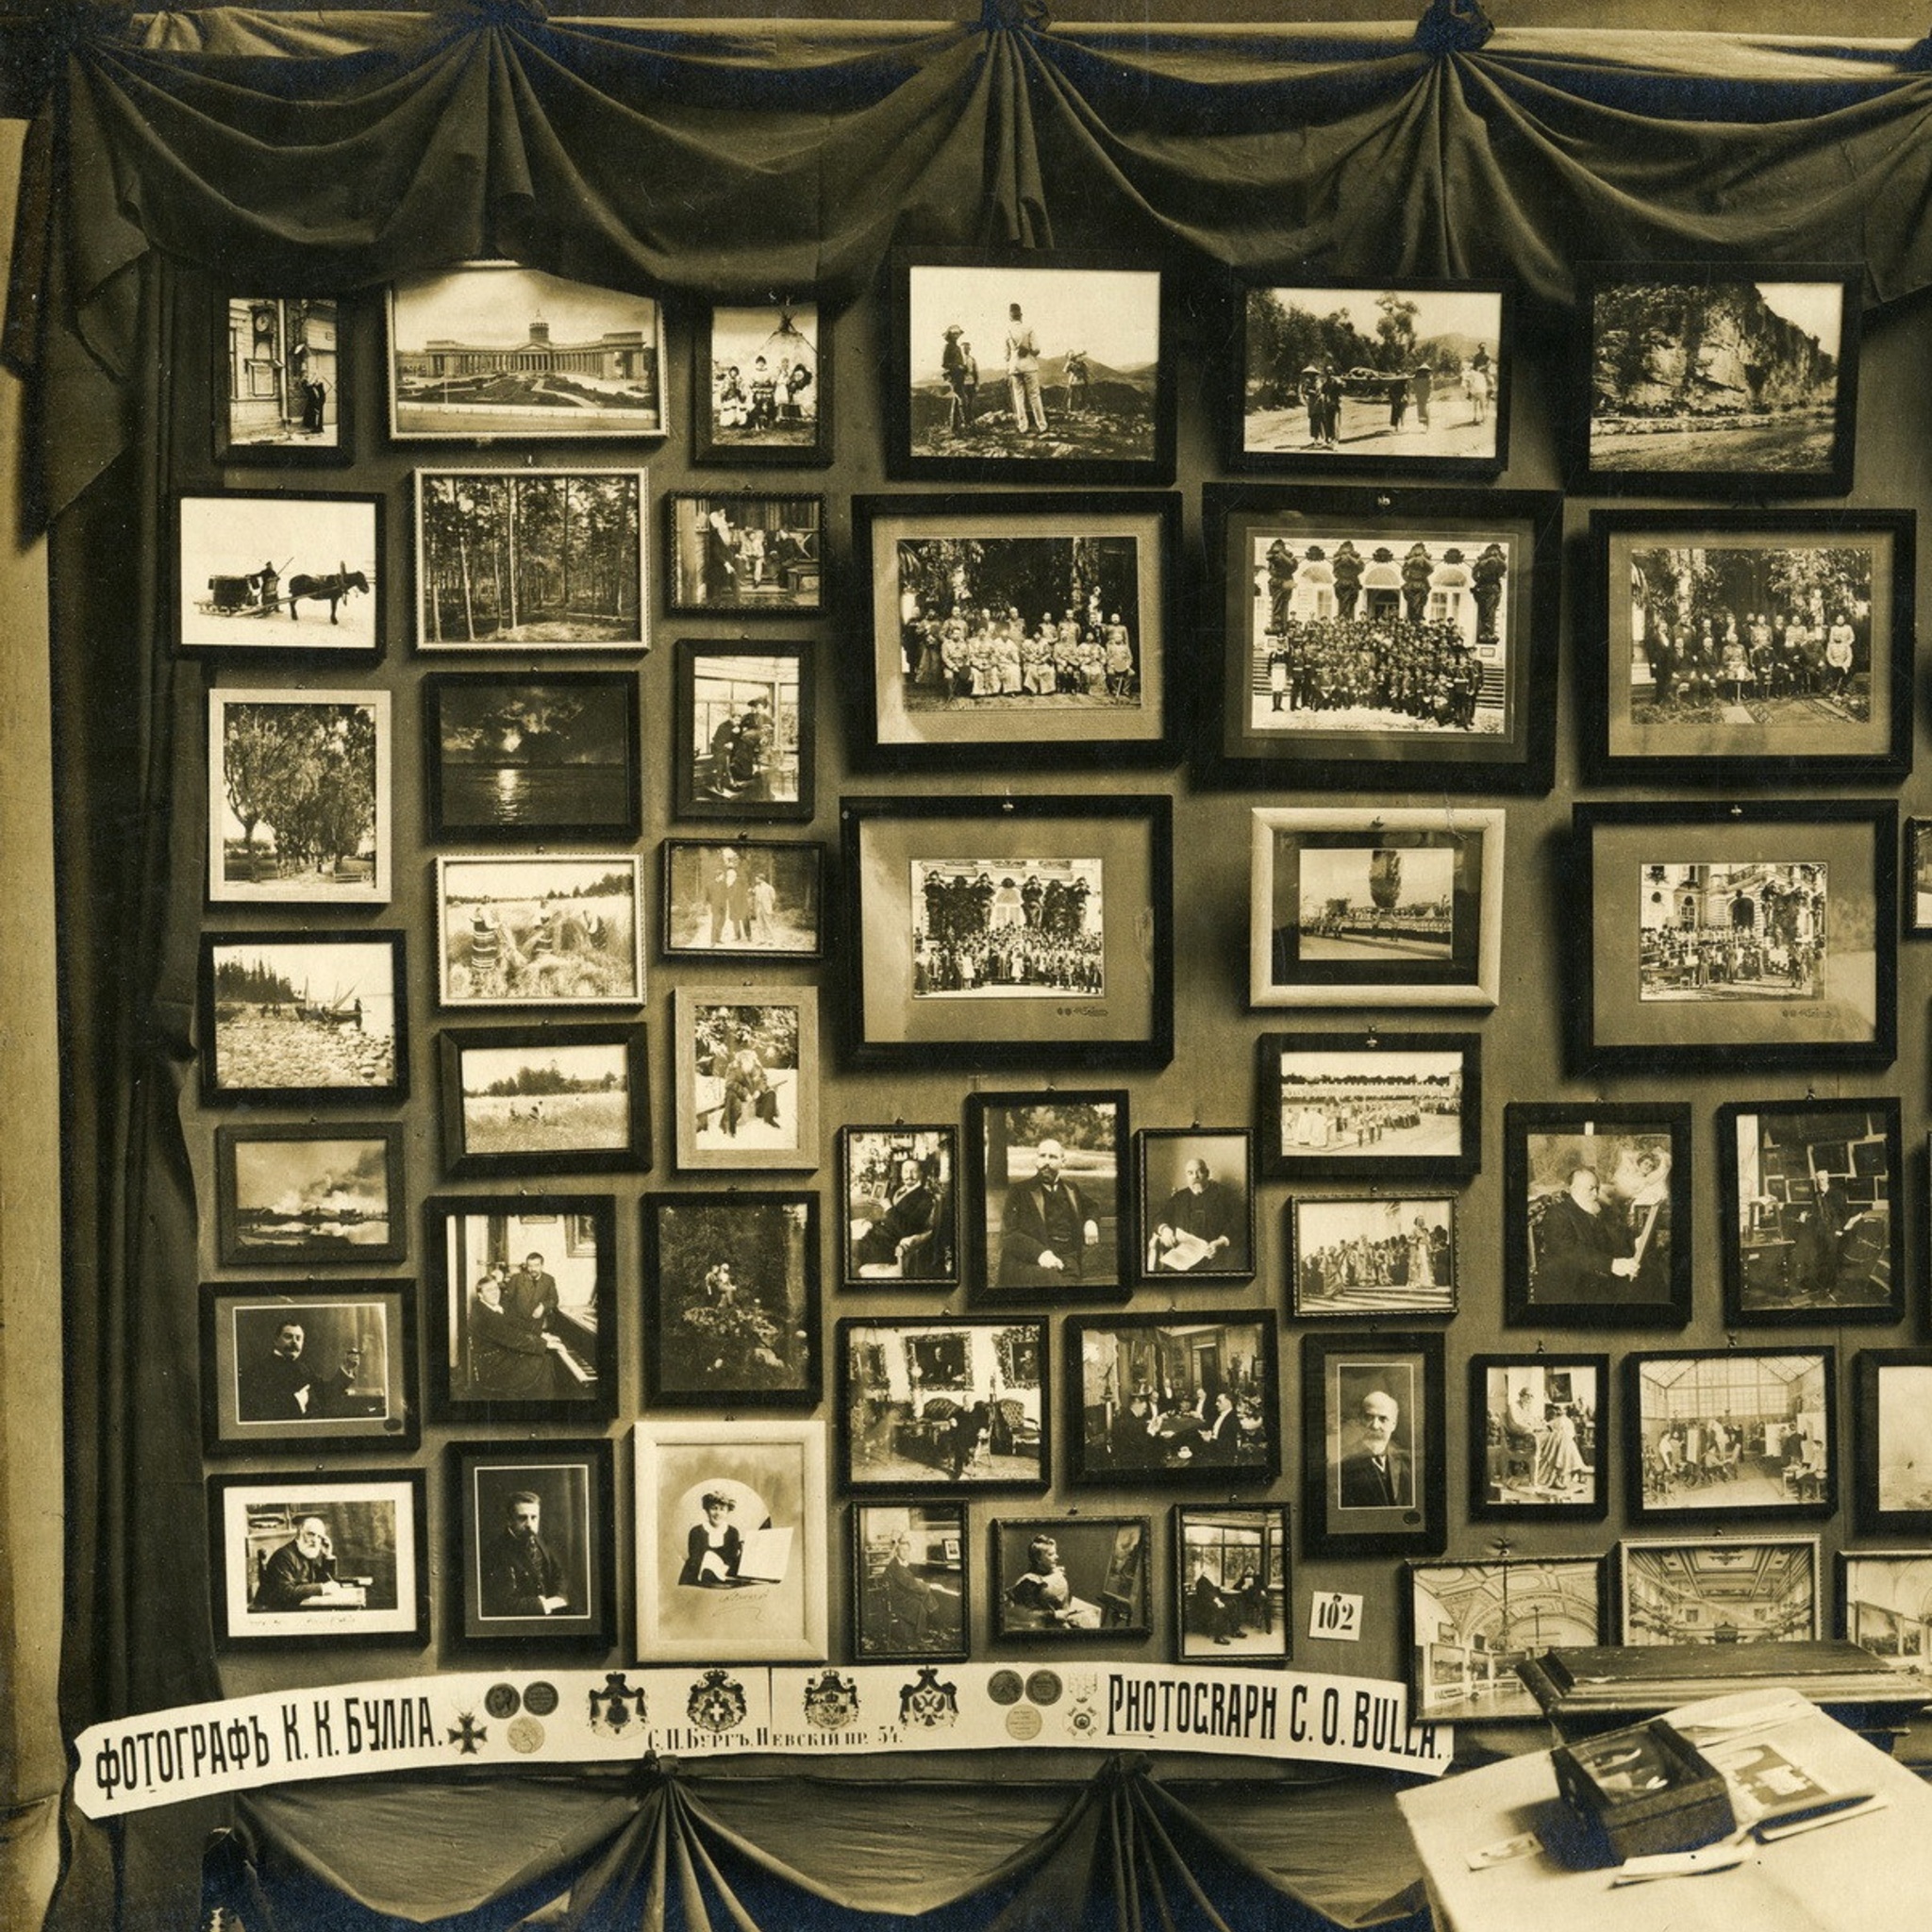 The exhibition On the eve of the First World War. Photo in 1912